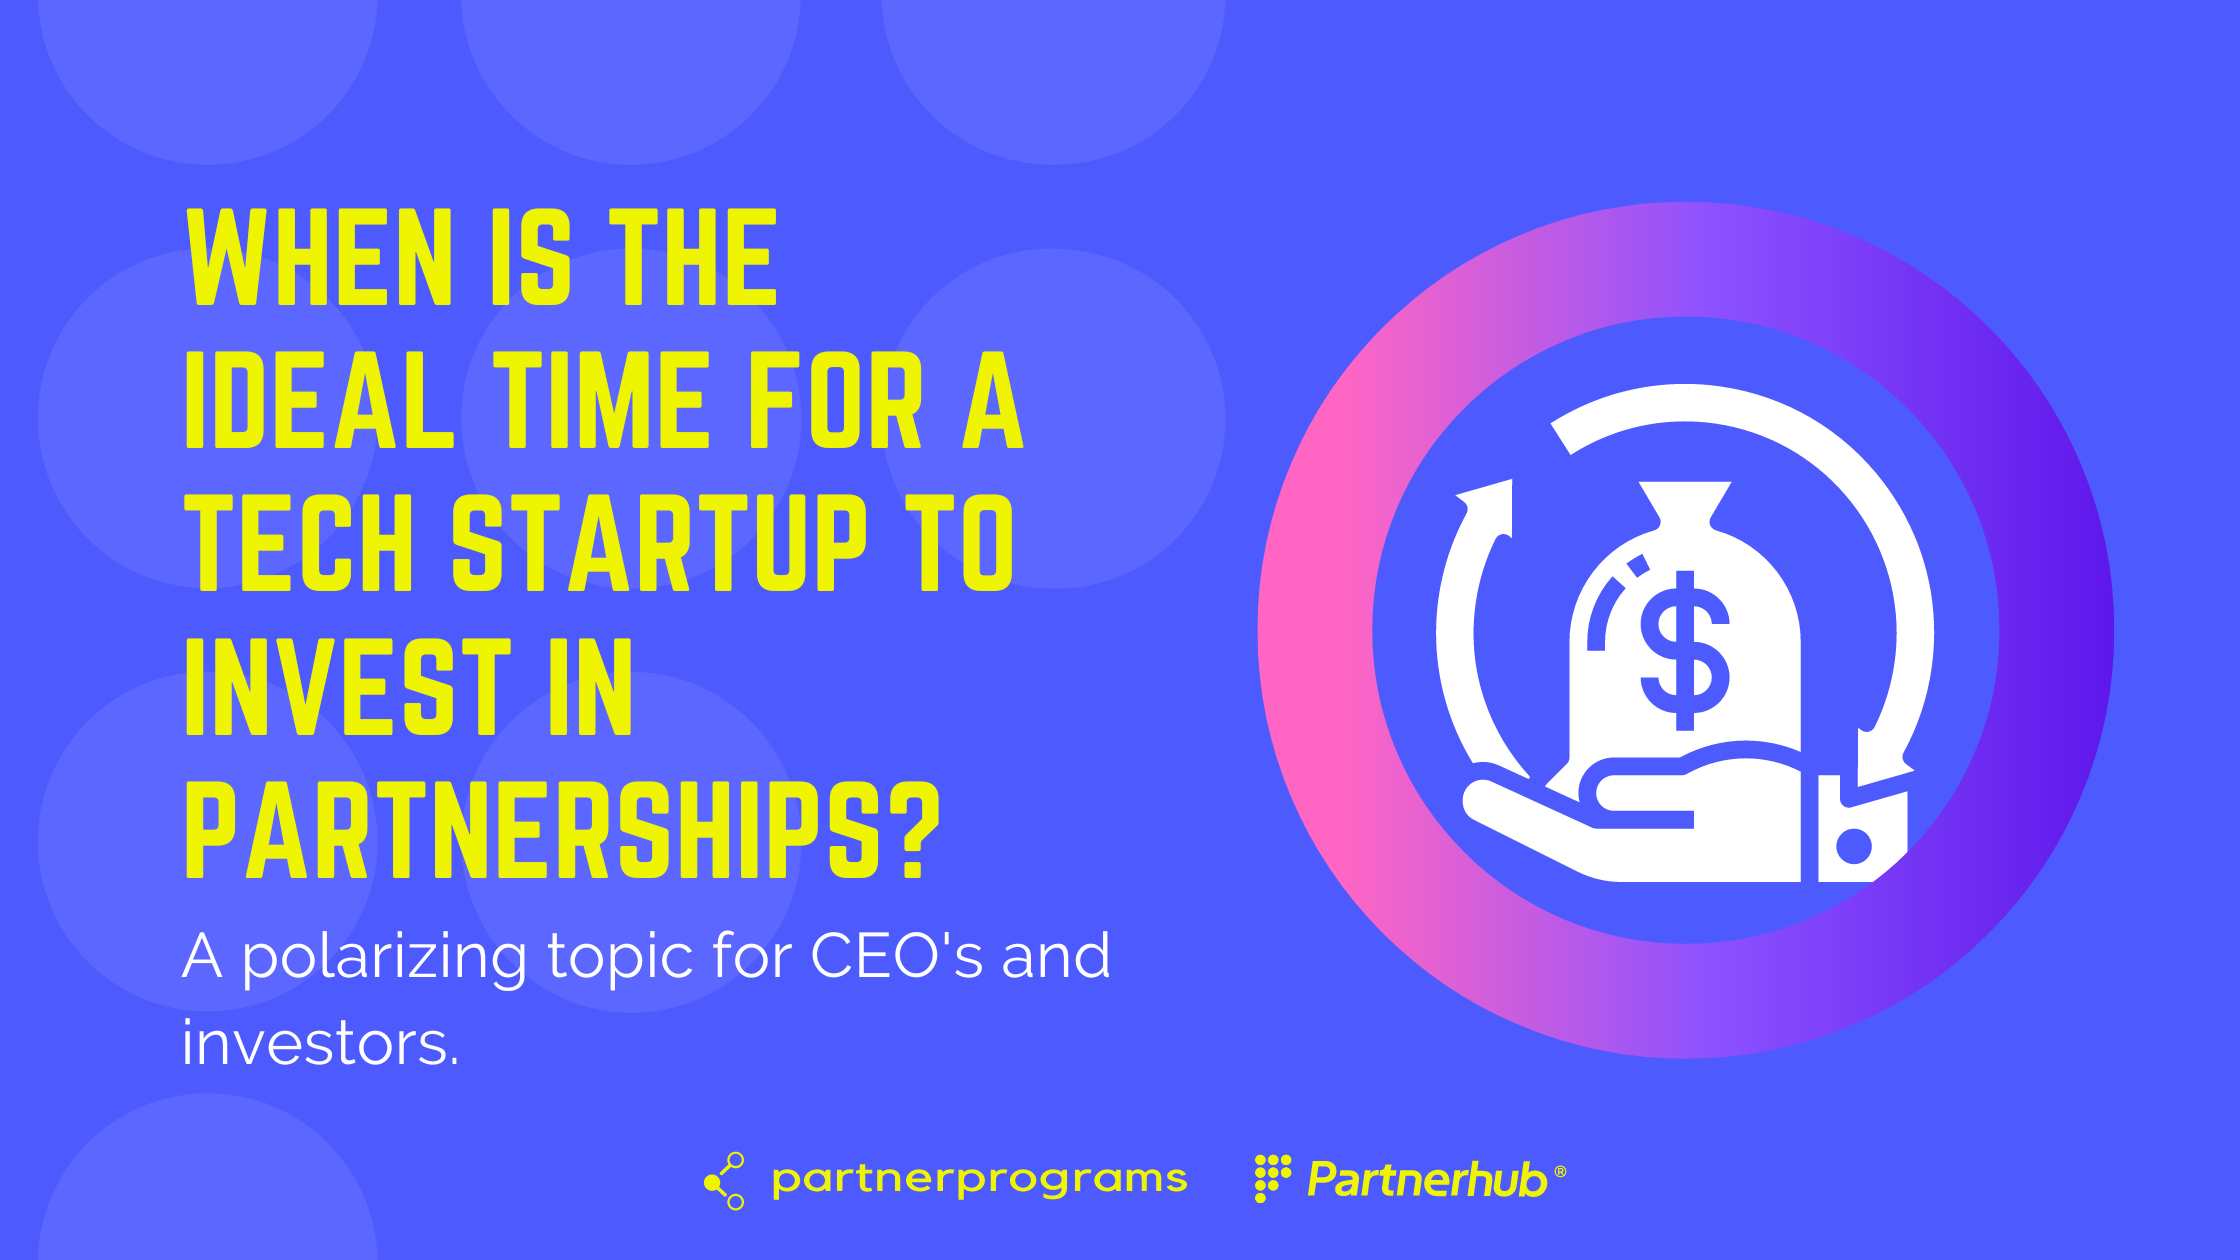 When is the ideal time for a tech startup to invest in partnerships?